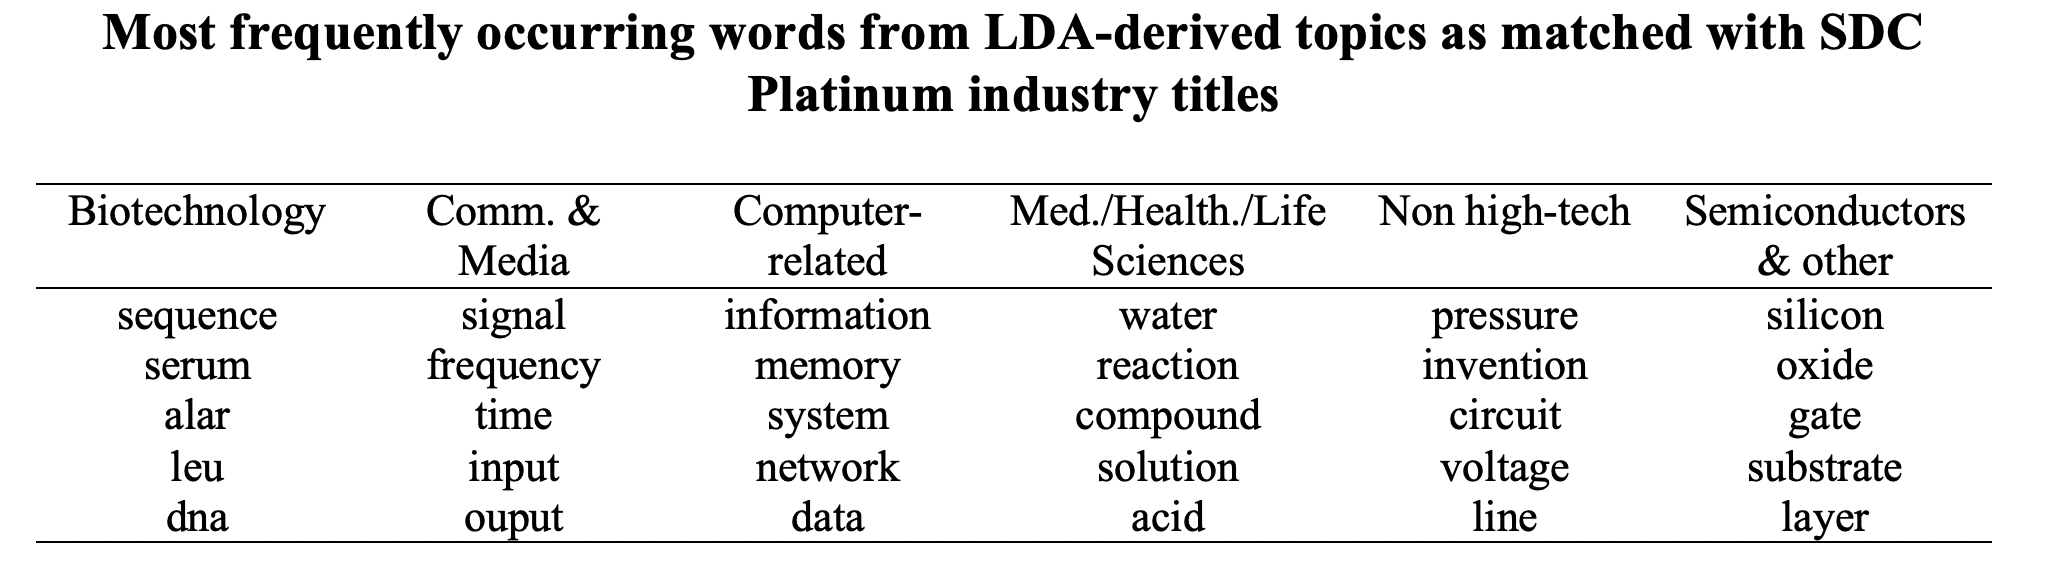 topic_words_matched_with_SDC_industry_categories.png